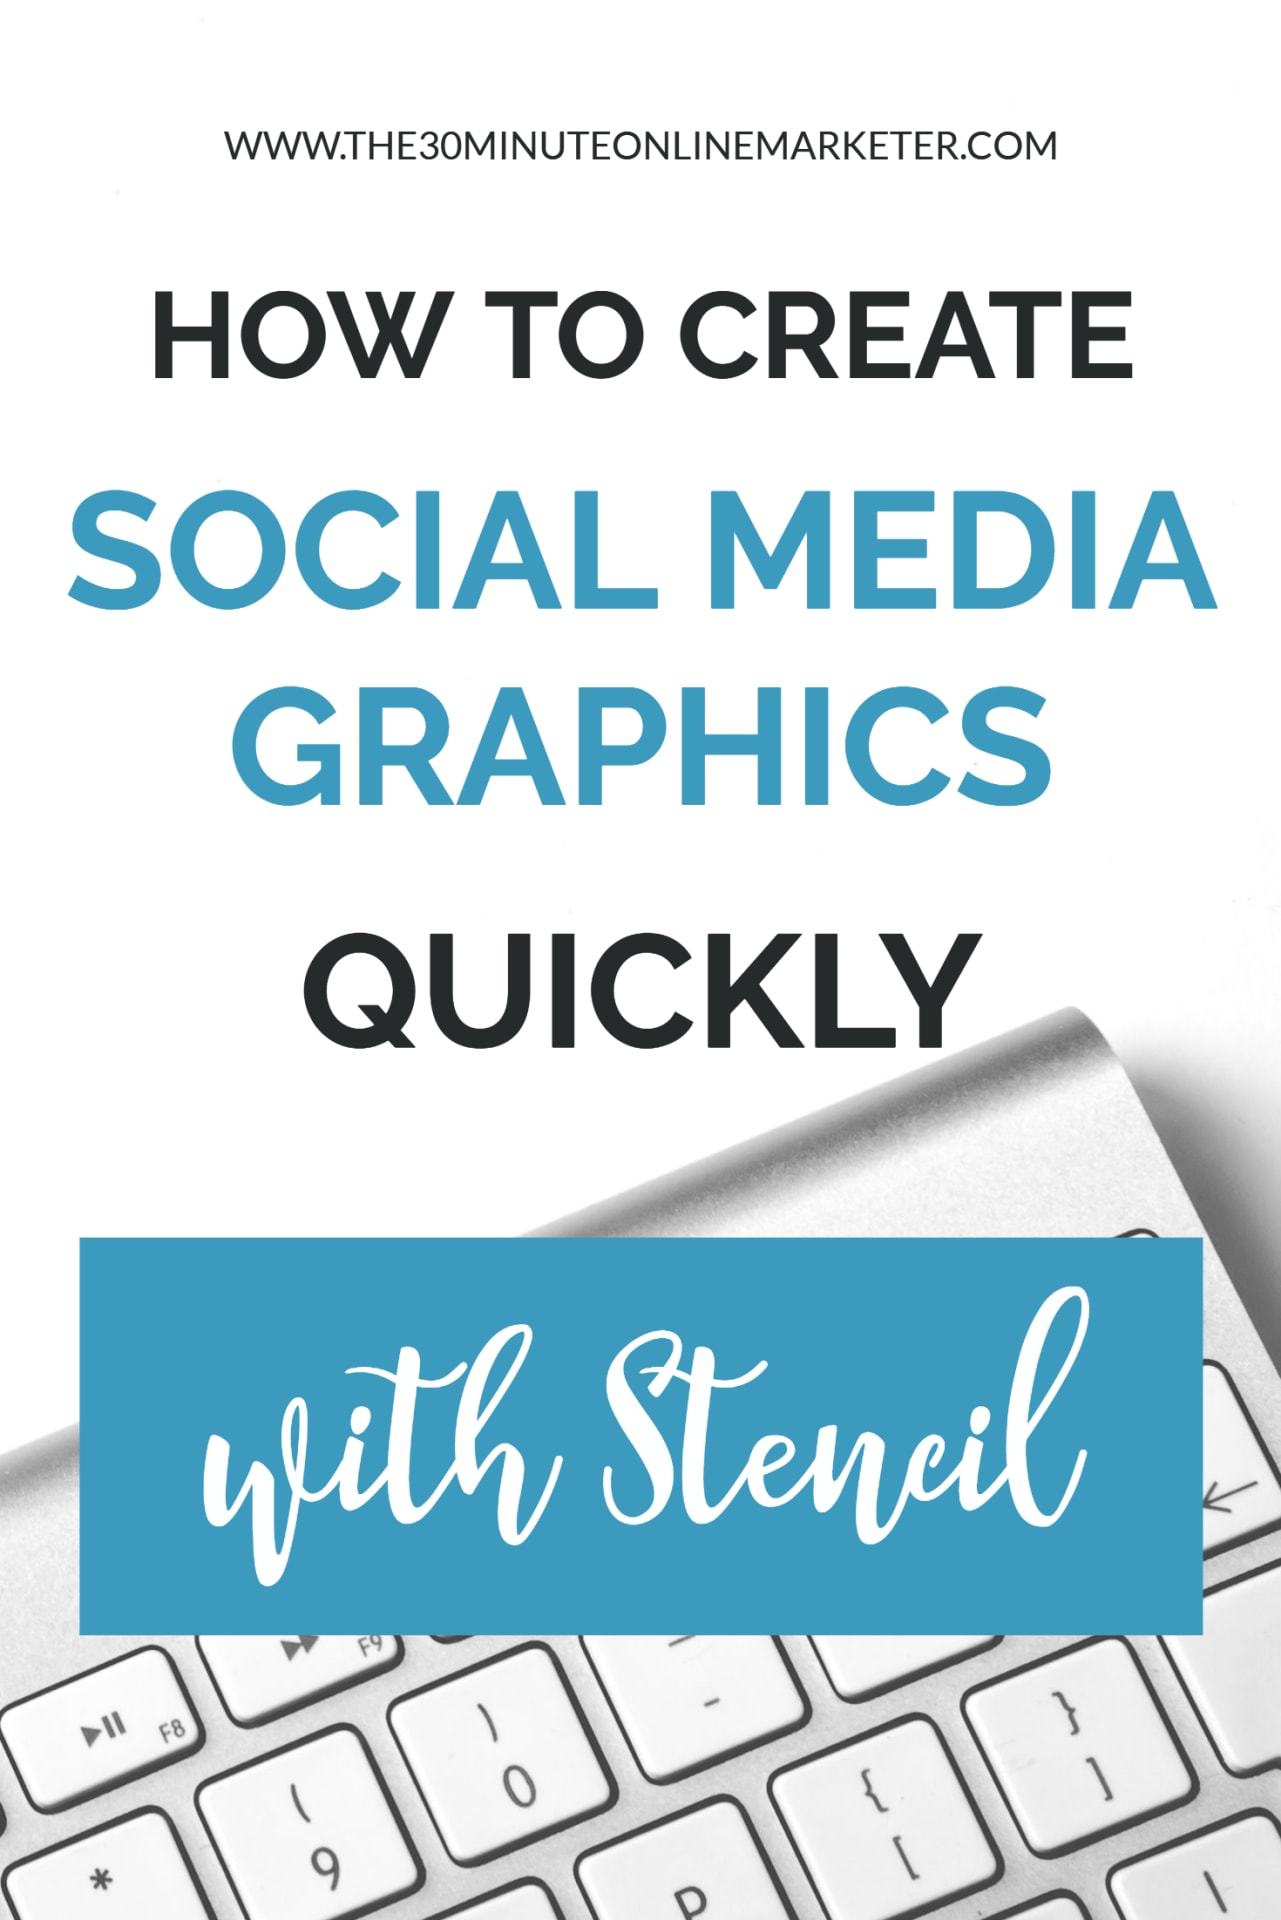 How to create social media graphics quickly with stencil